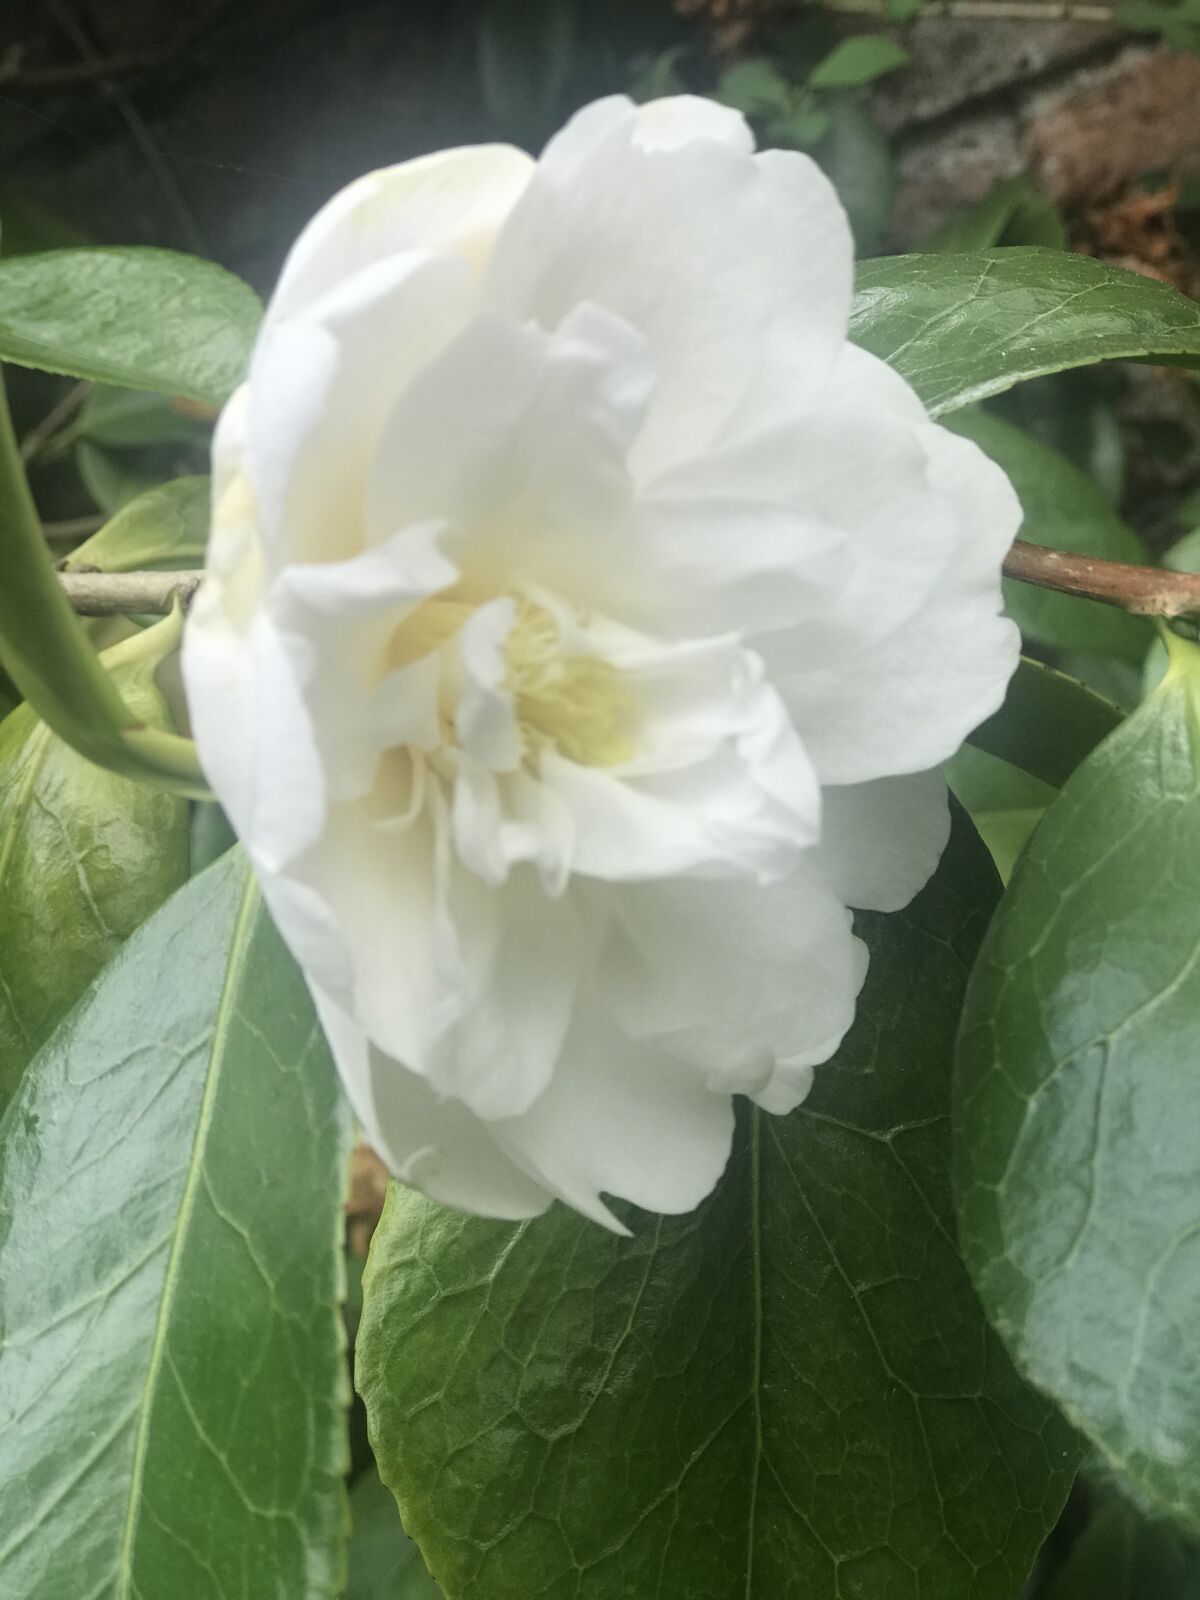 In addition to using the leaves for tea, the Camellia sinensis plant has bright white flowers.